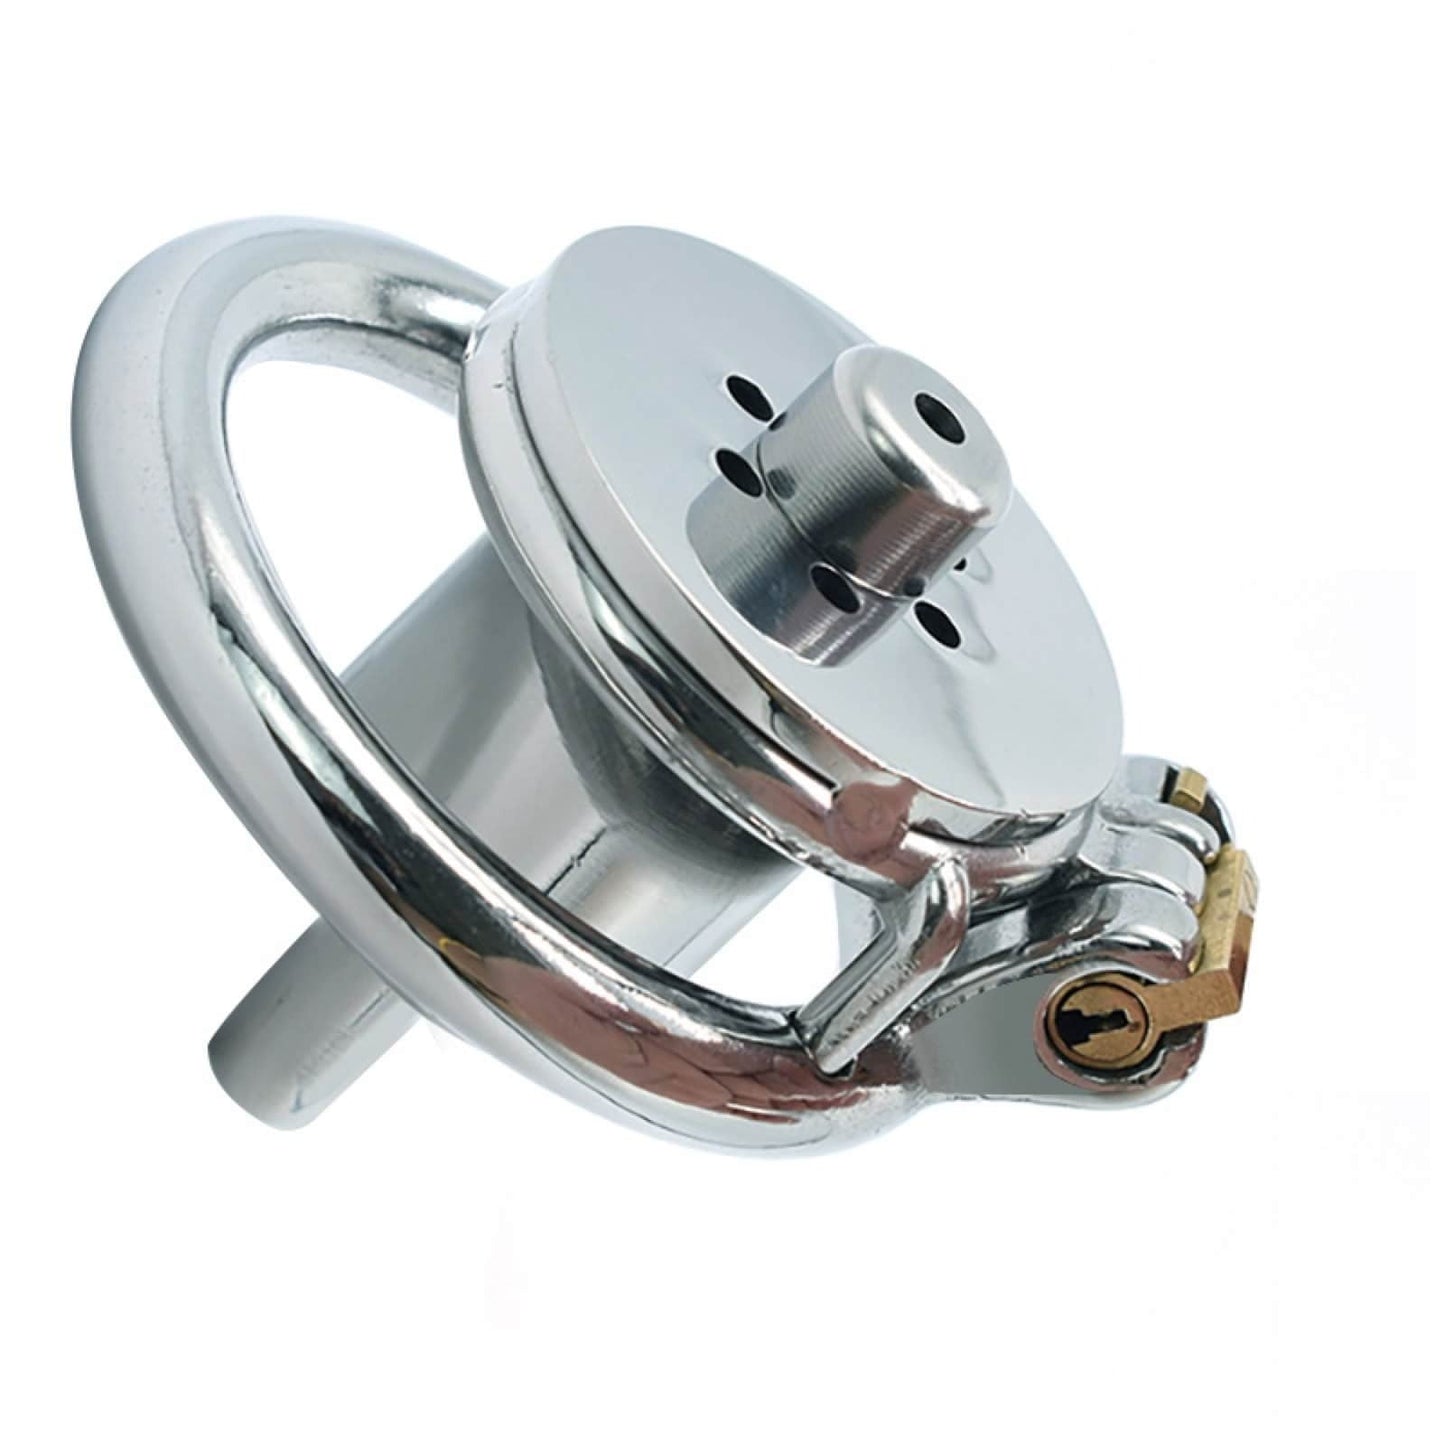 Stainless Steel Flat Chastity Cage with a Built-in Catheter - KeepMeLocked